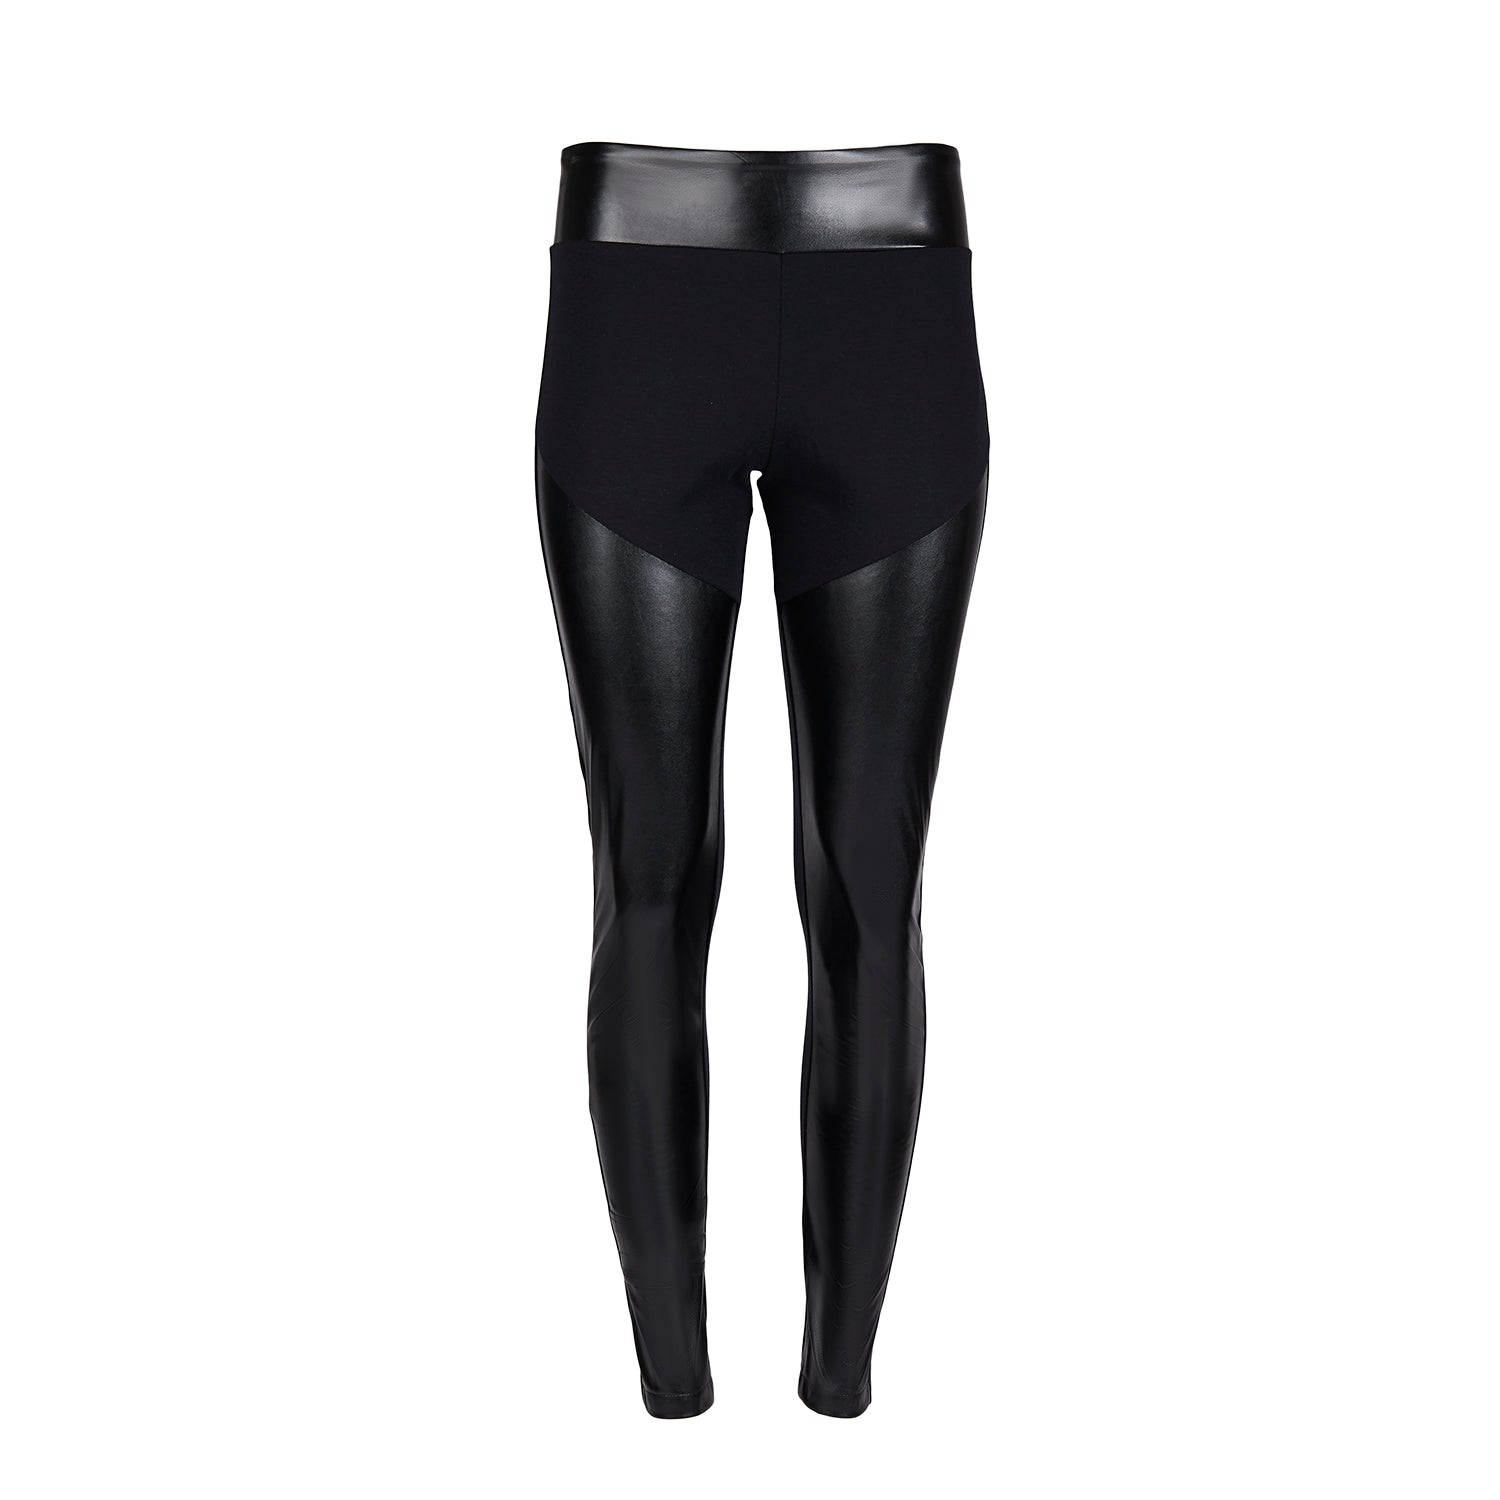 5 Ways to Accessorize Your Black Faux Leather Leggings – Malaika